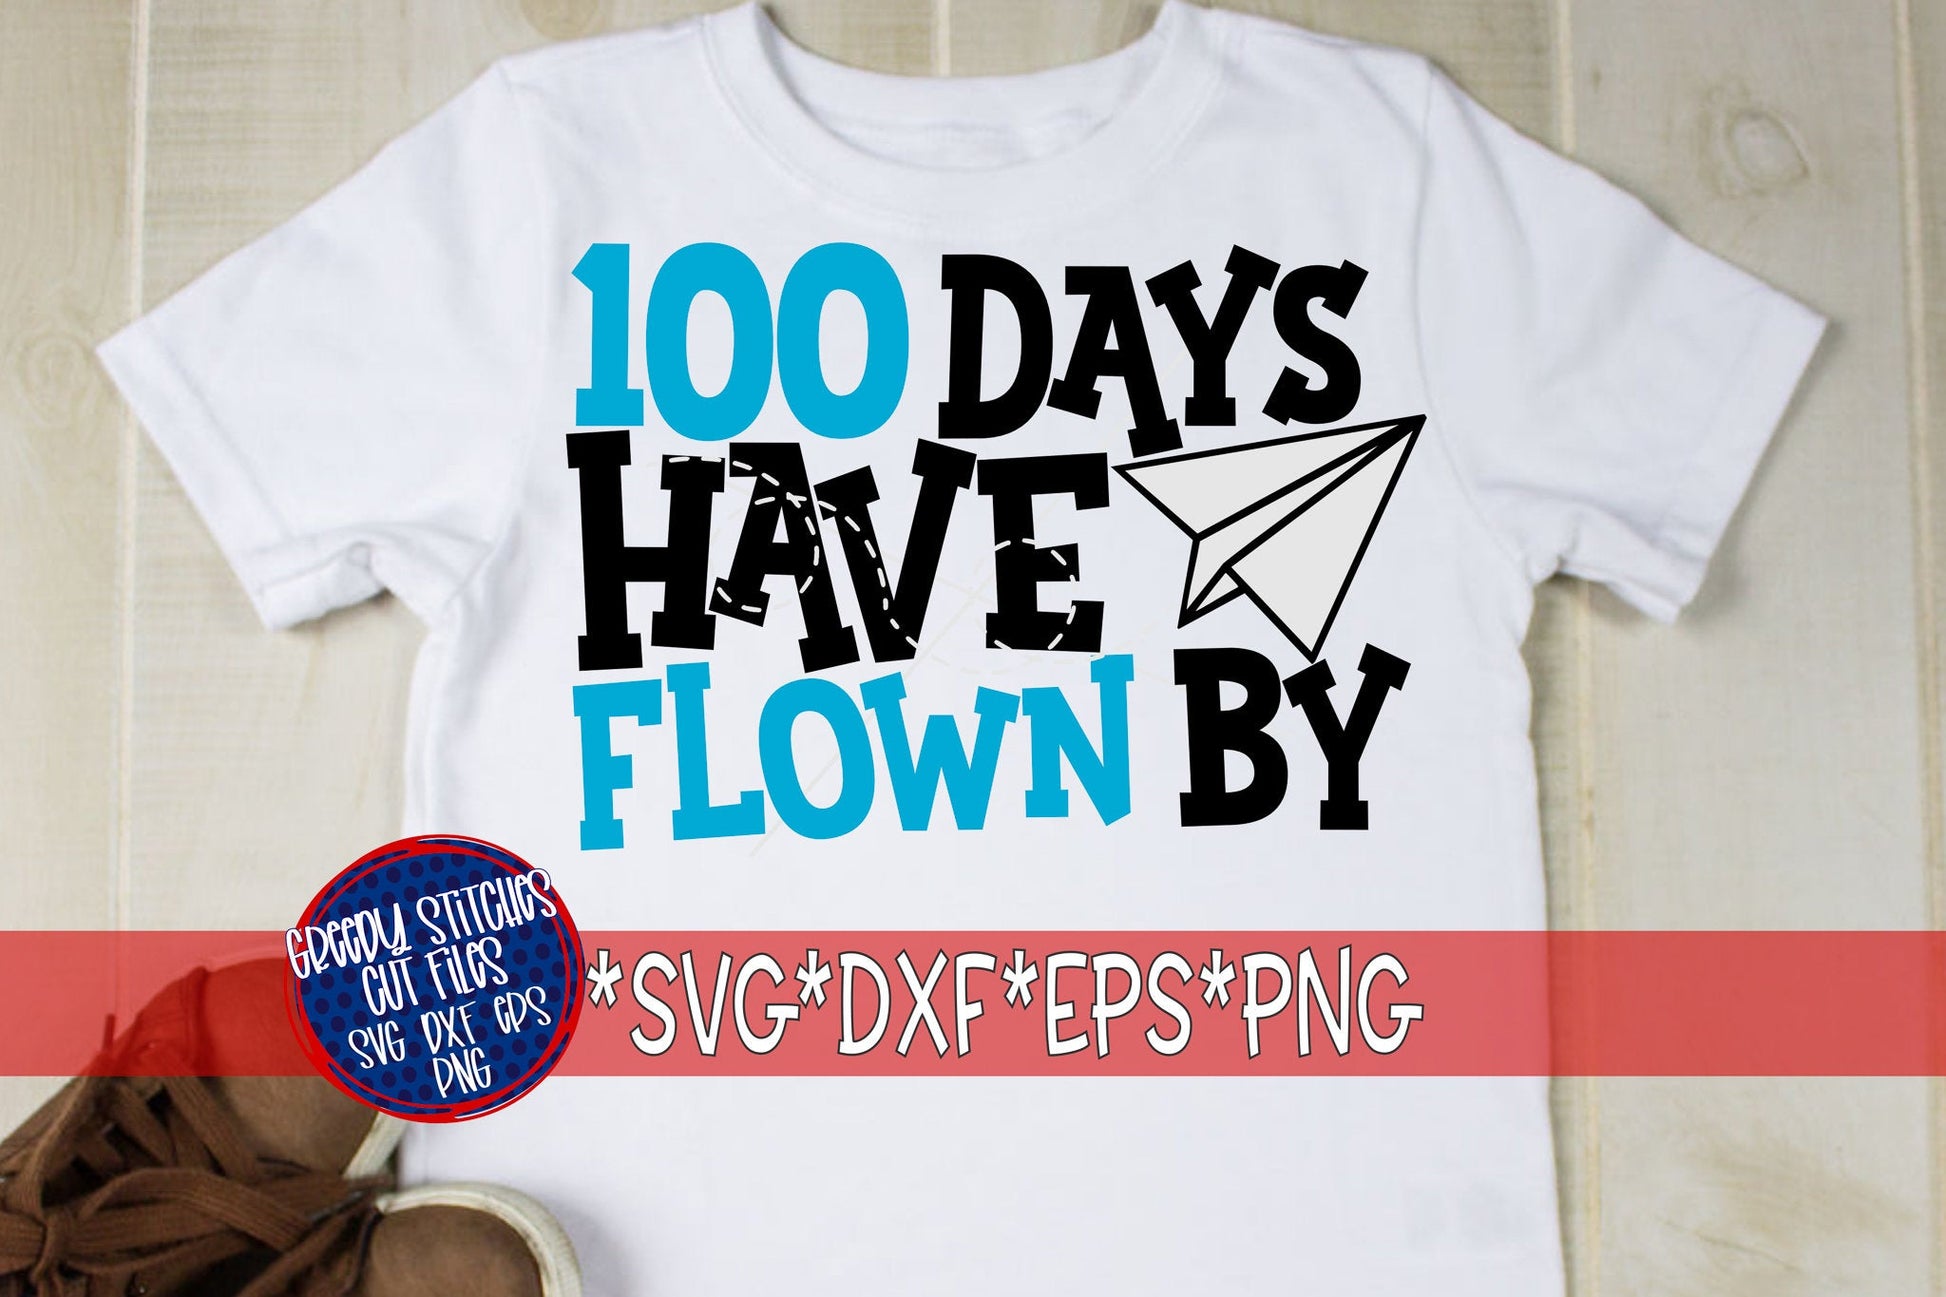 100 Days Have Flown By svg, dxf eps png. 100 Days Of School SvG | School SvG | 100 Days SvG | School SvG | 100th | Instant Download Cut File